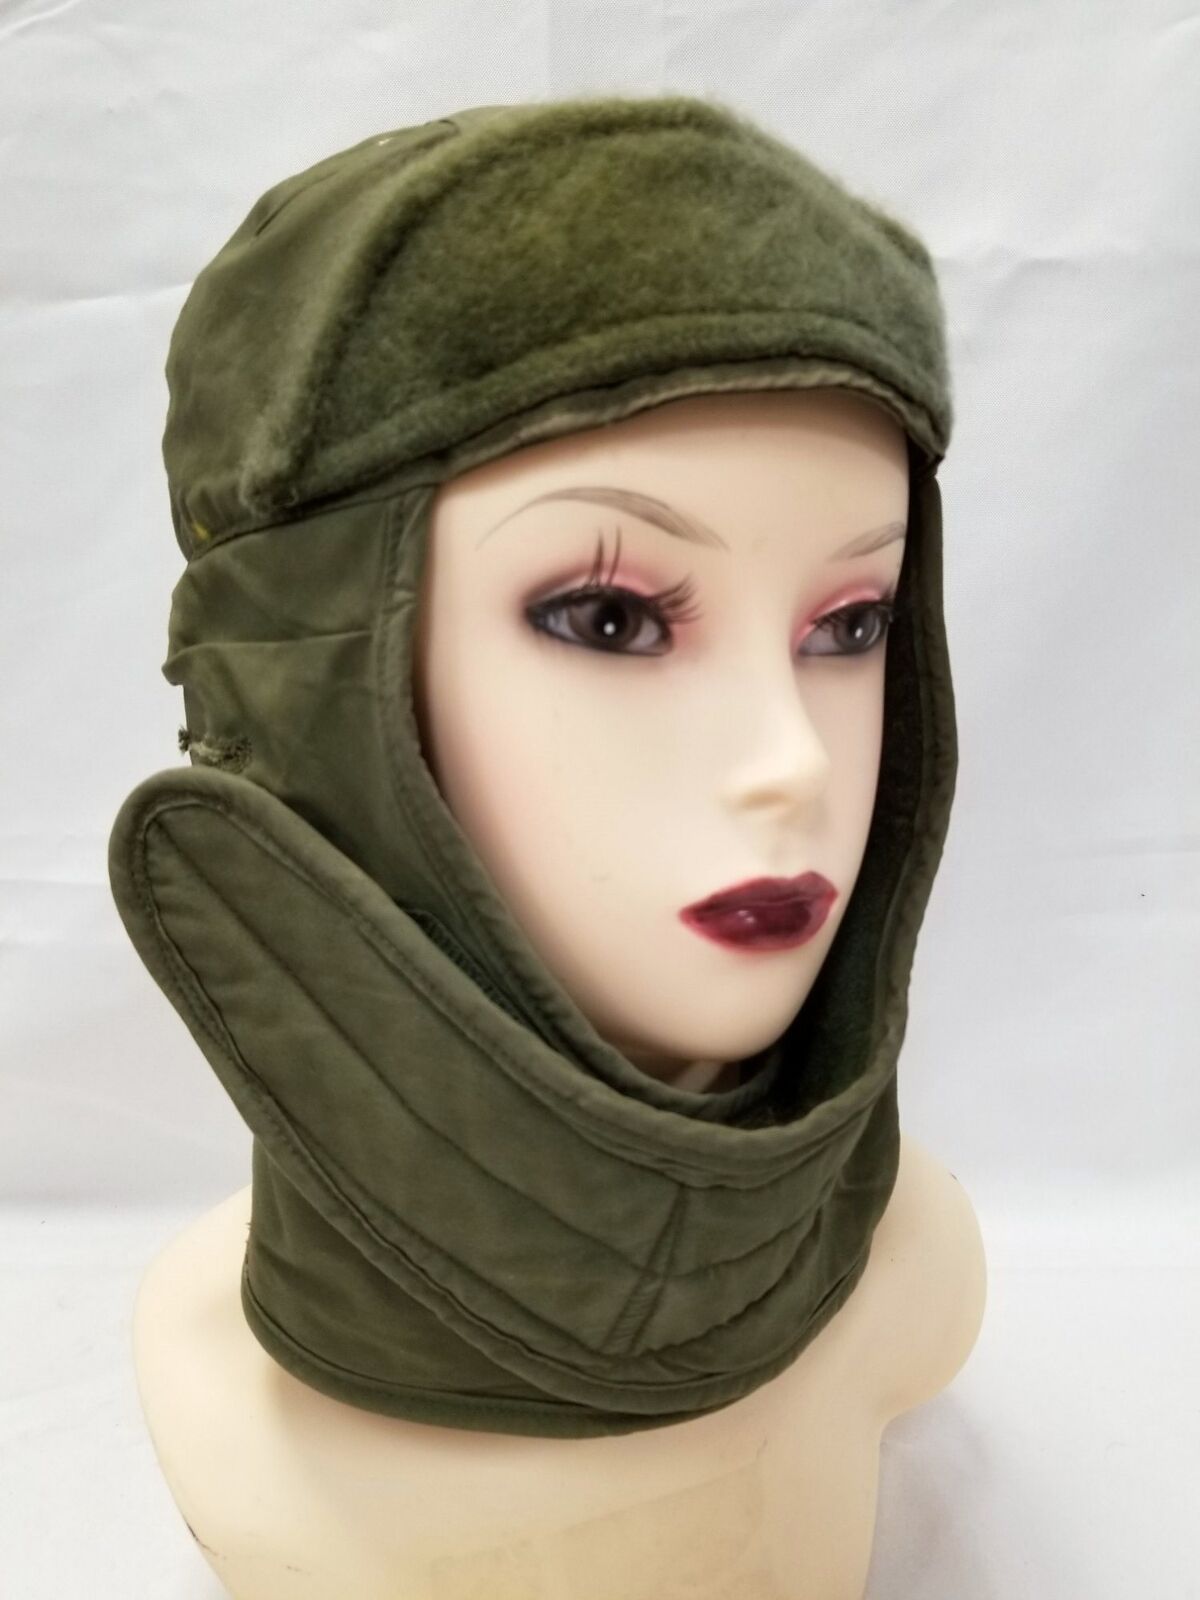 US Military Pile Cap Green Cold Weather Hat Insulating Helmet Liner Size 7 1/4^